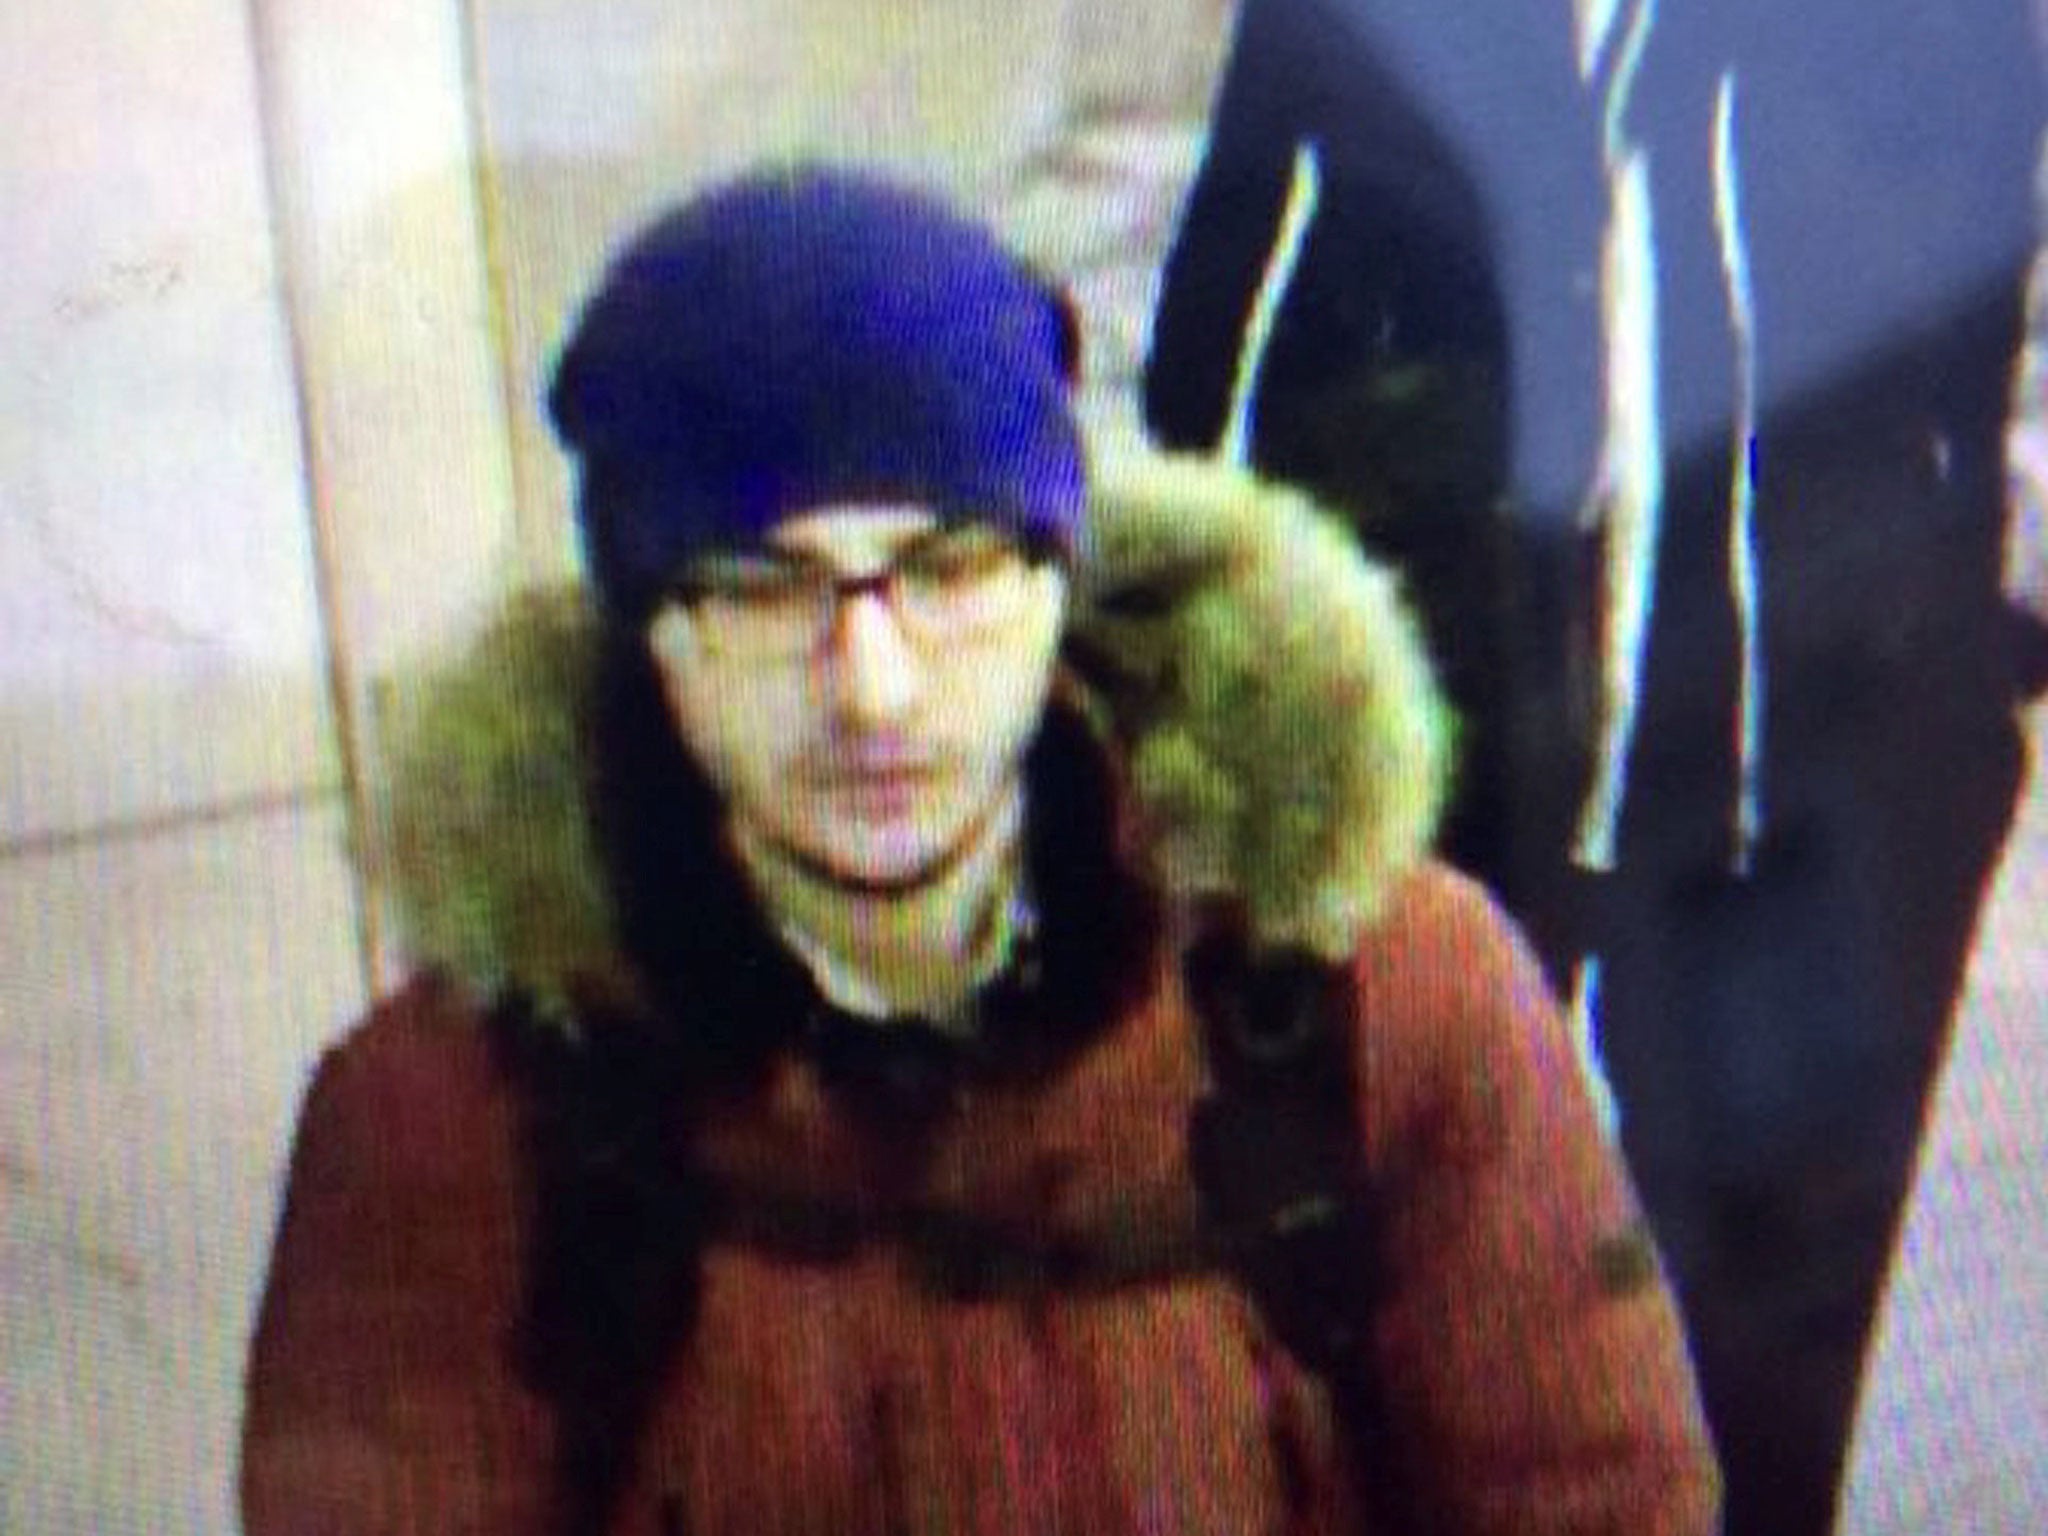 A still image of the suspect walking at St Petersburg's metro station